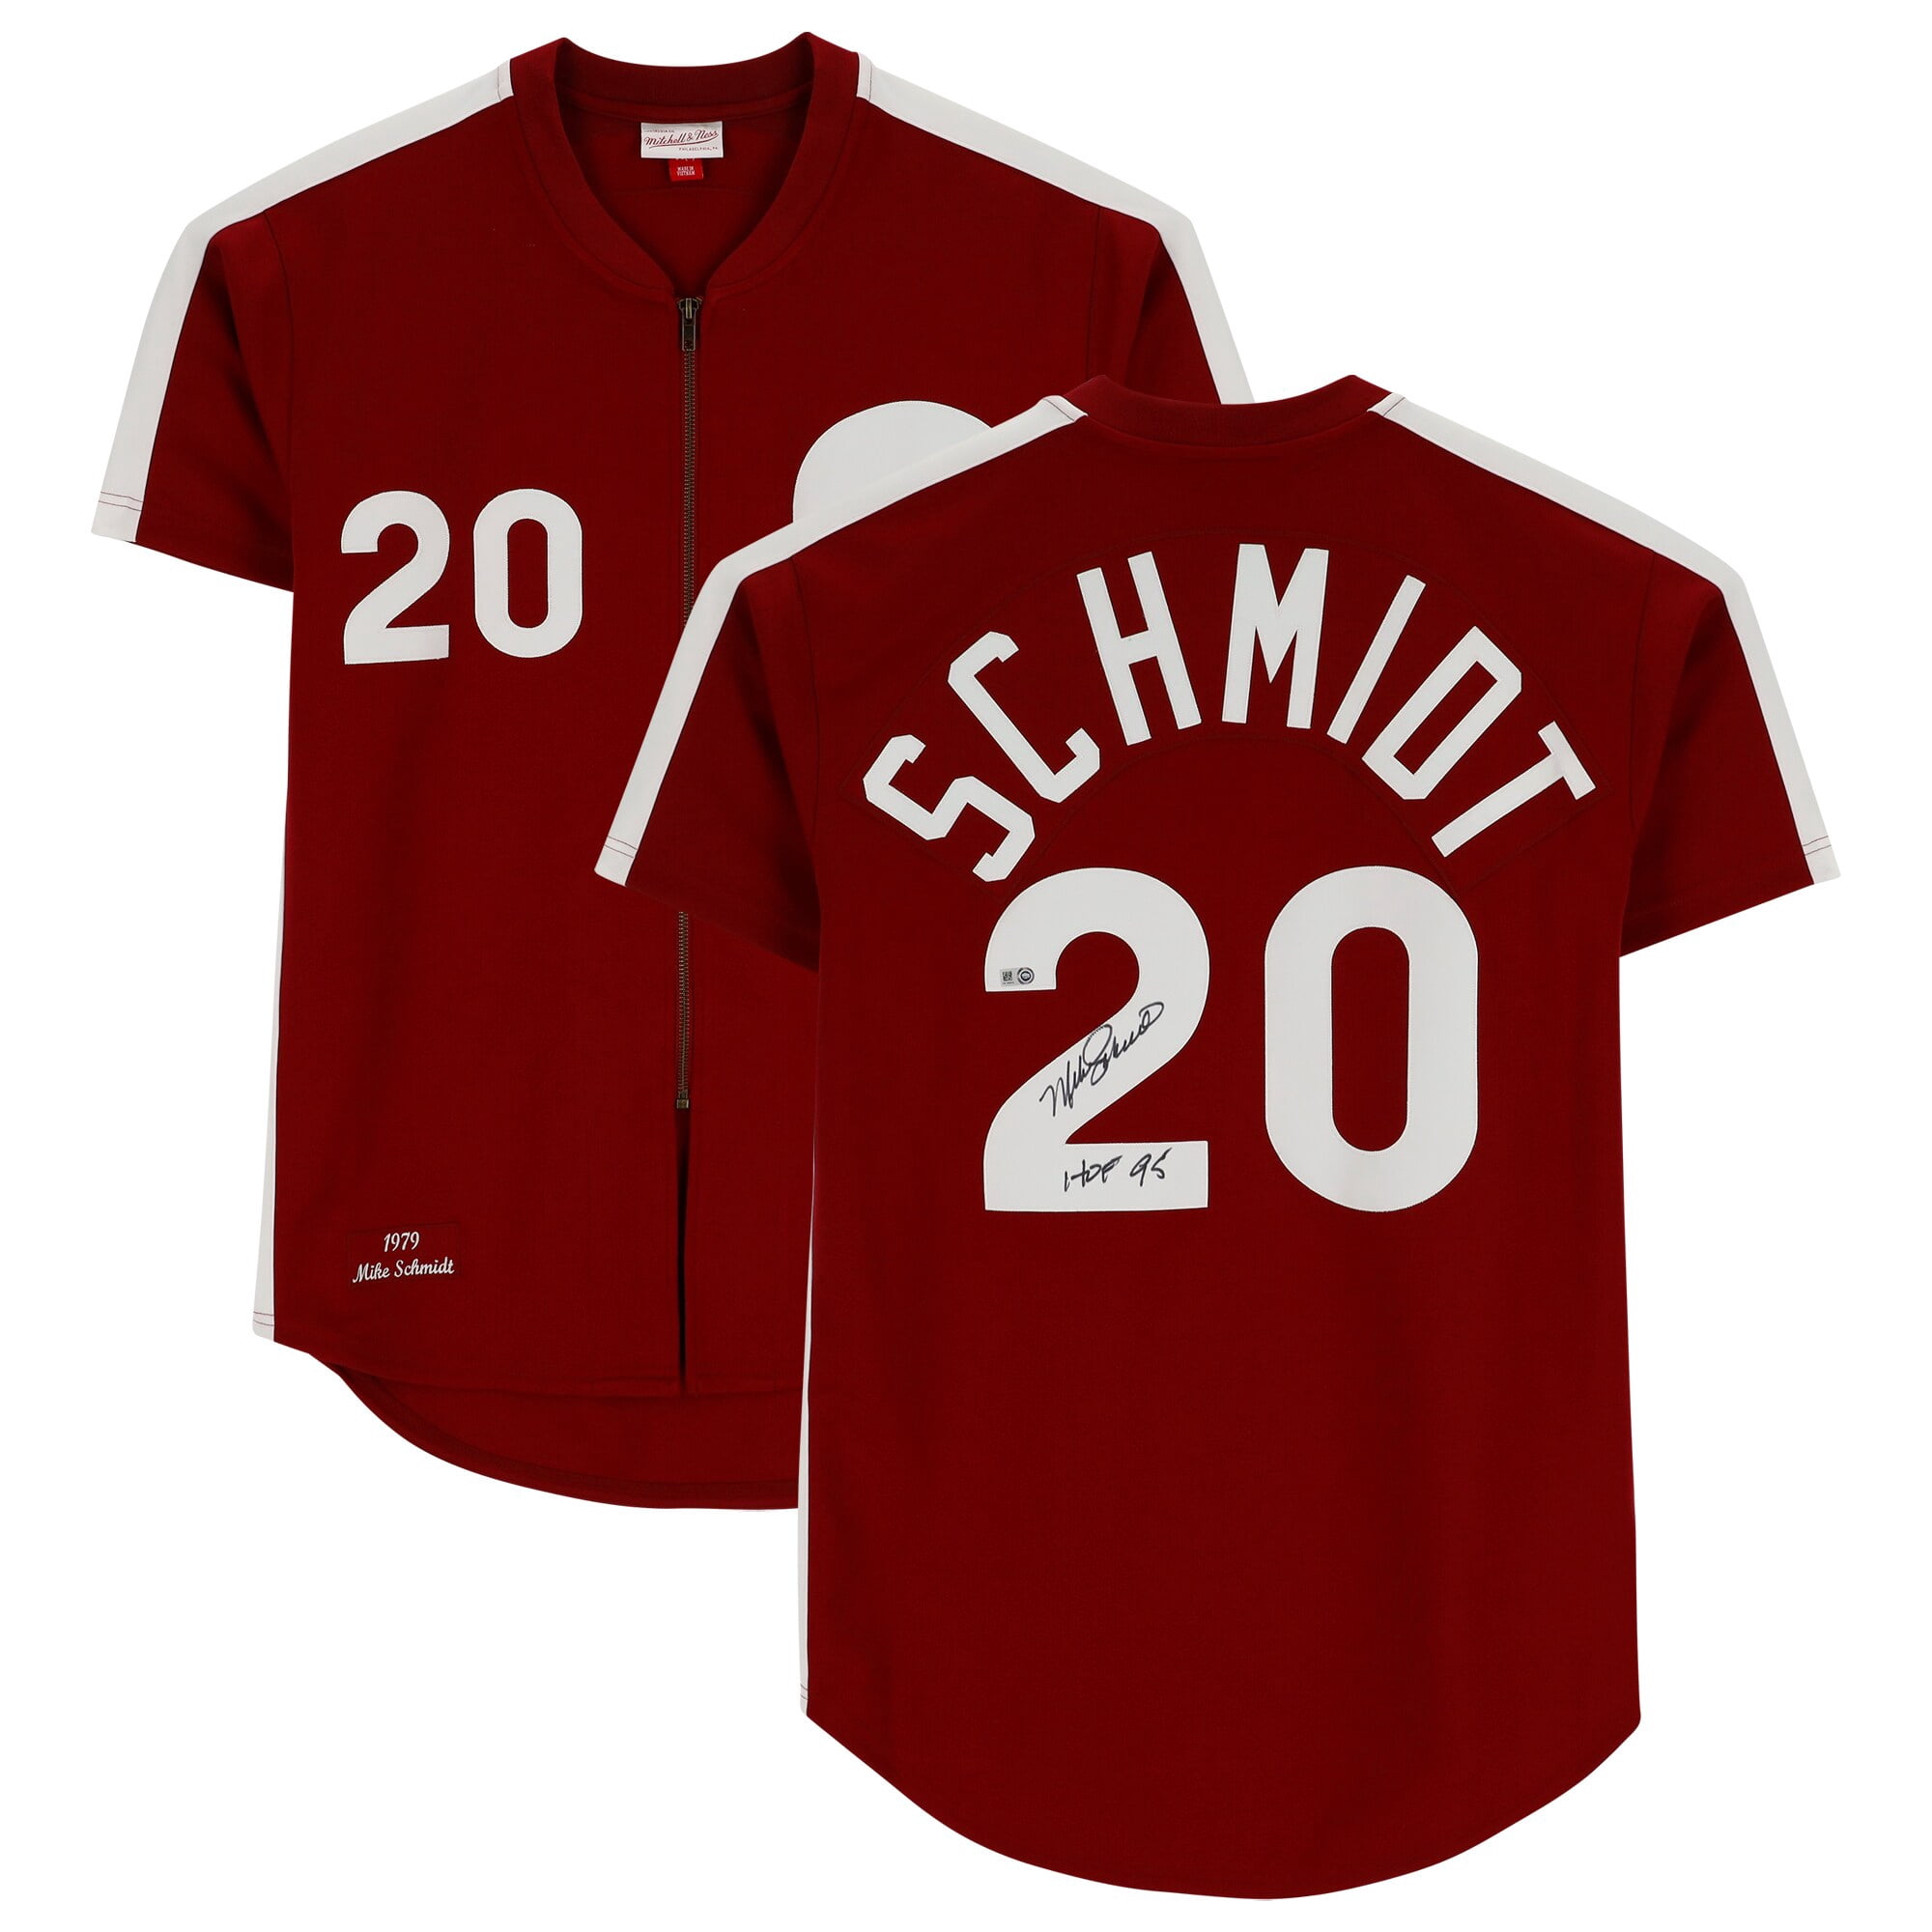 Mike Schmidt Philadelphia Phillies Autographed Mitchell & Ness Authentic  Maroon 1979 Jersey with HOF 95 Inscription 